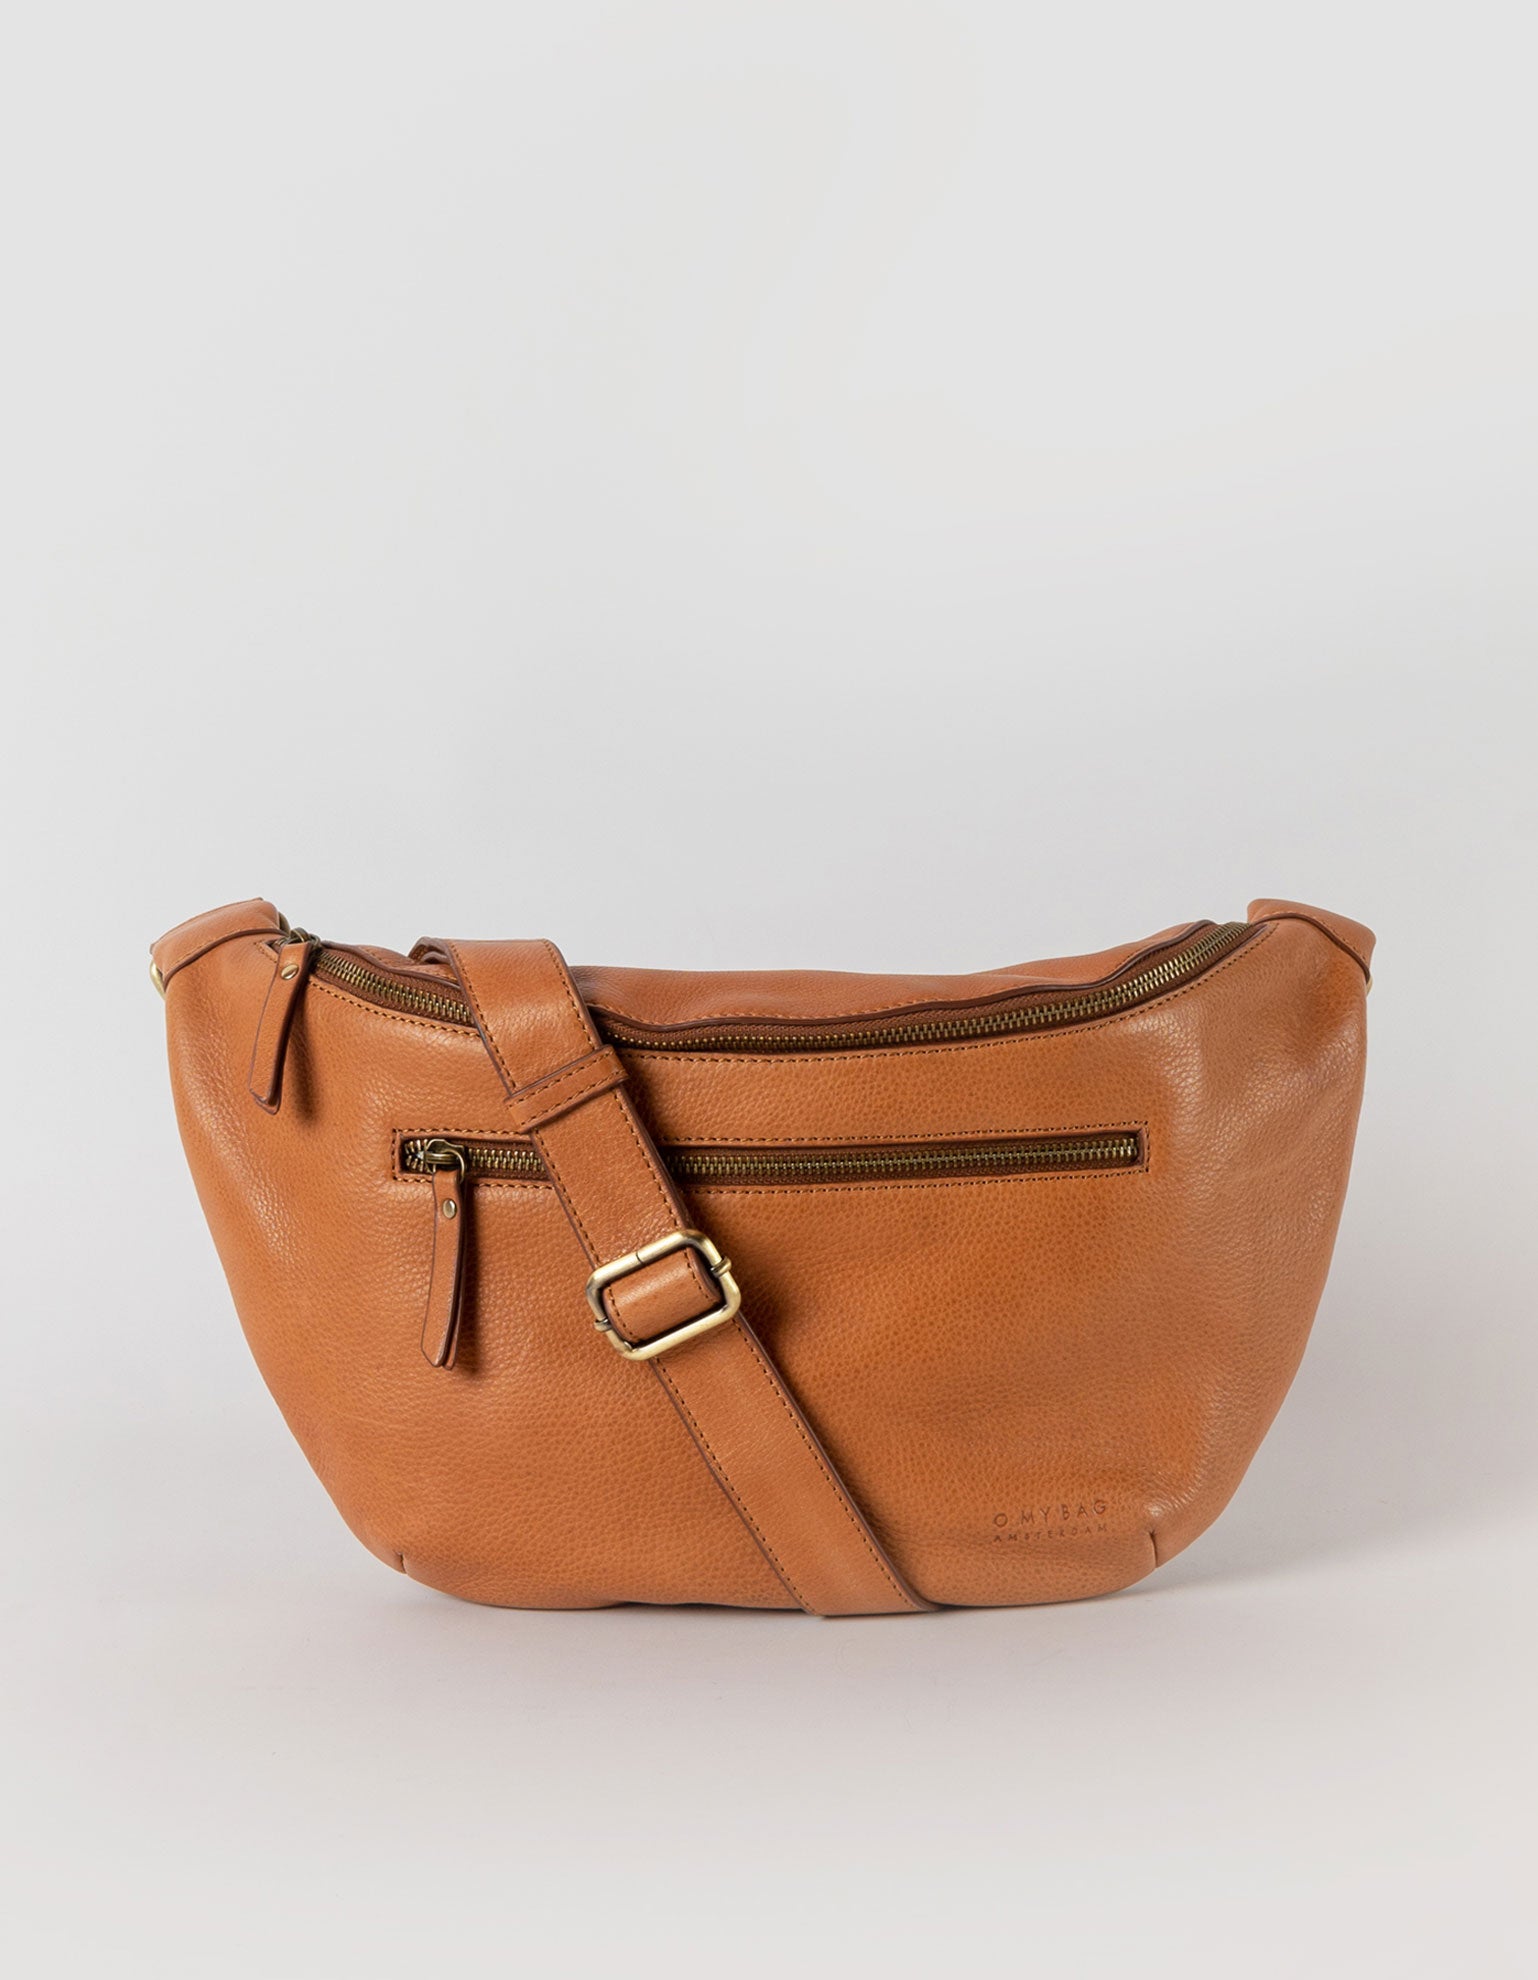 Drew Maxi in wild oak soft grain leather with adjustable leather strap. Front product image.